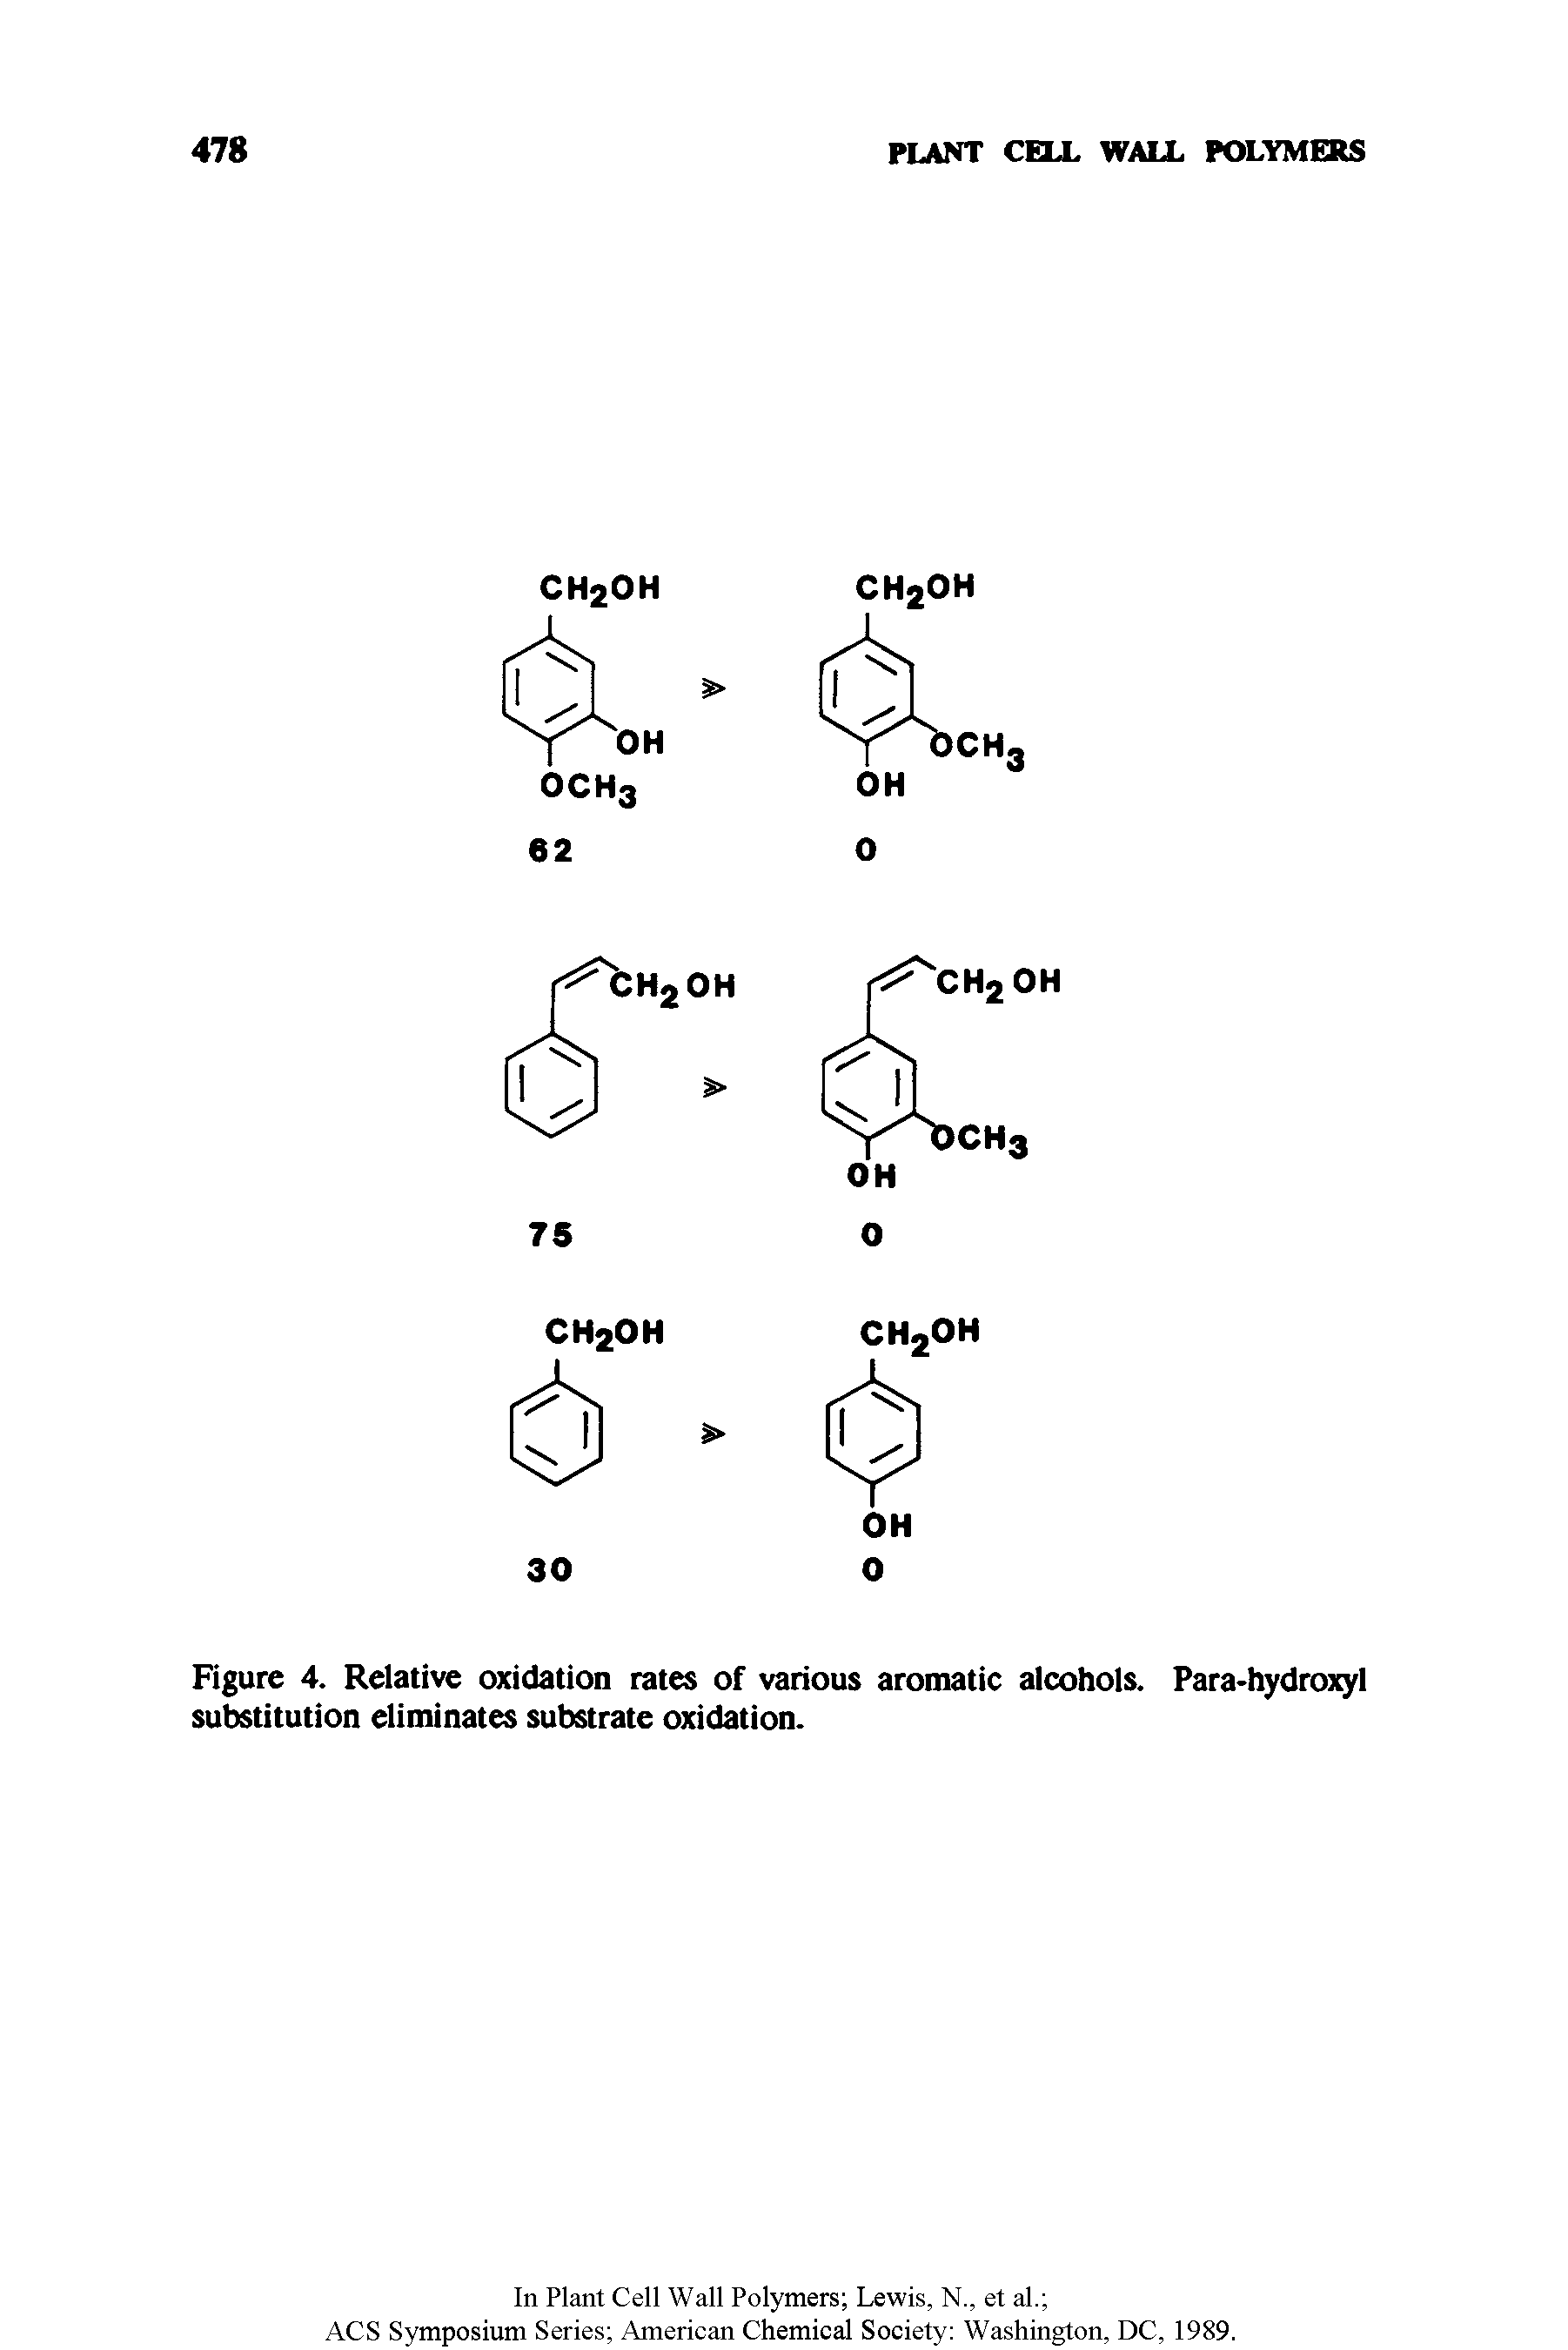 Figure 4. Relative oxidation rates of various aromatic alcohols. Para-hydroxyl substitution eliminates substrate oxidation.